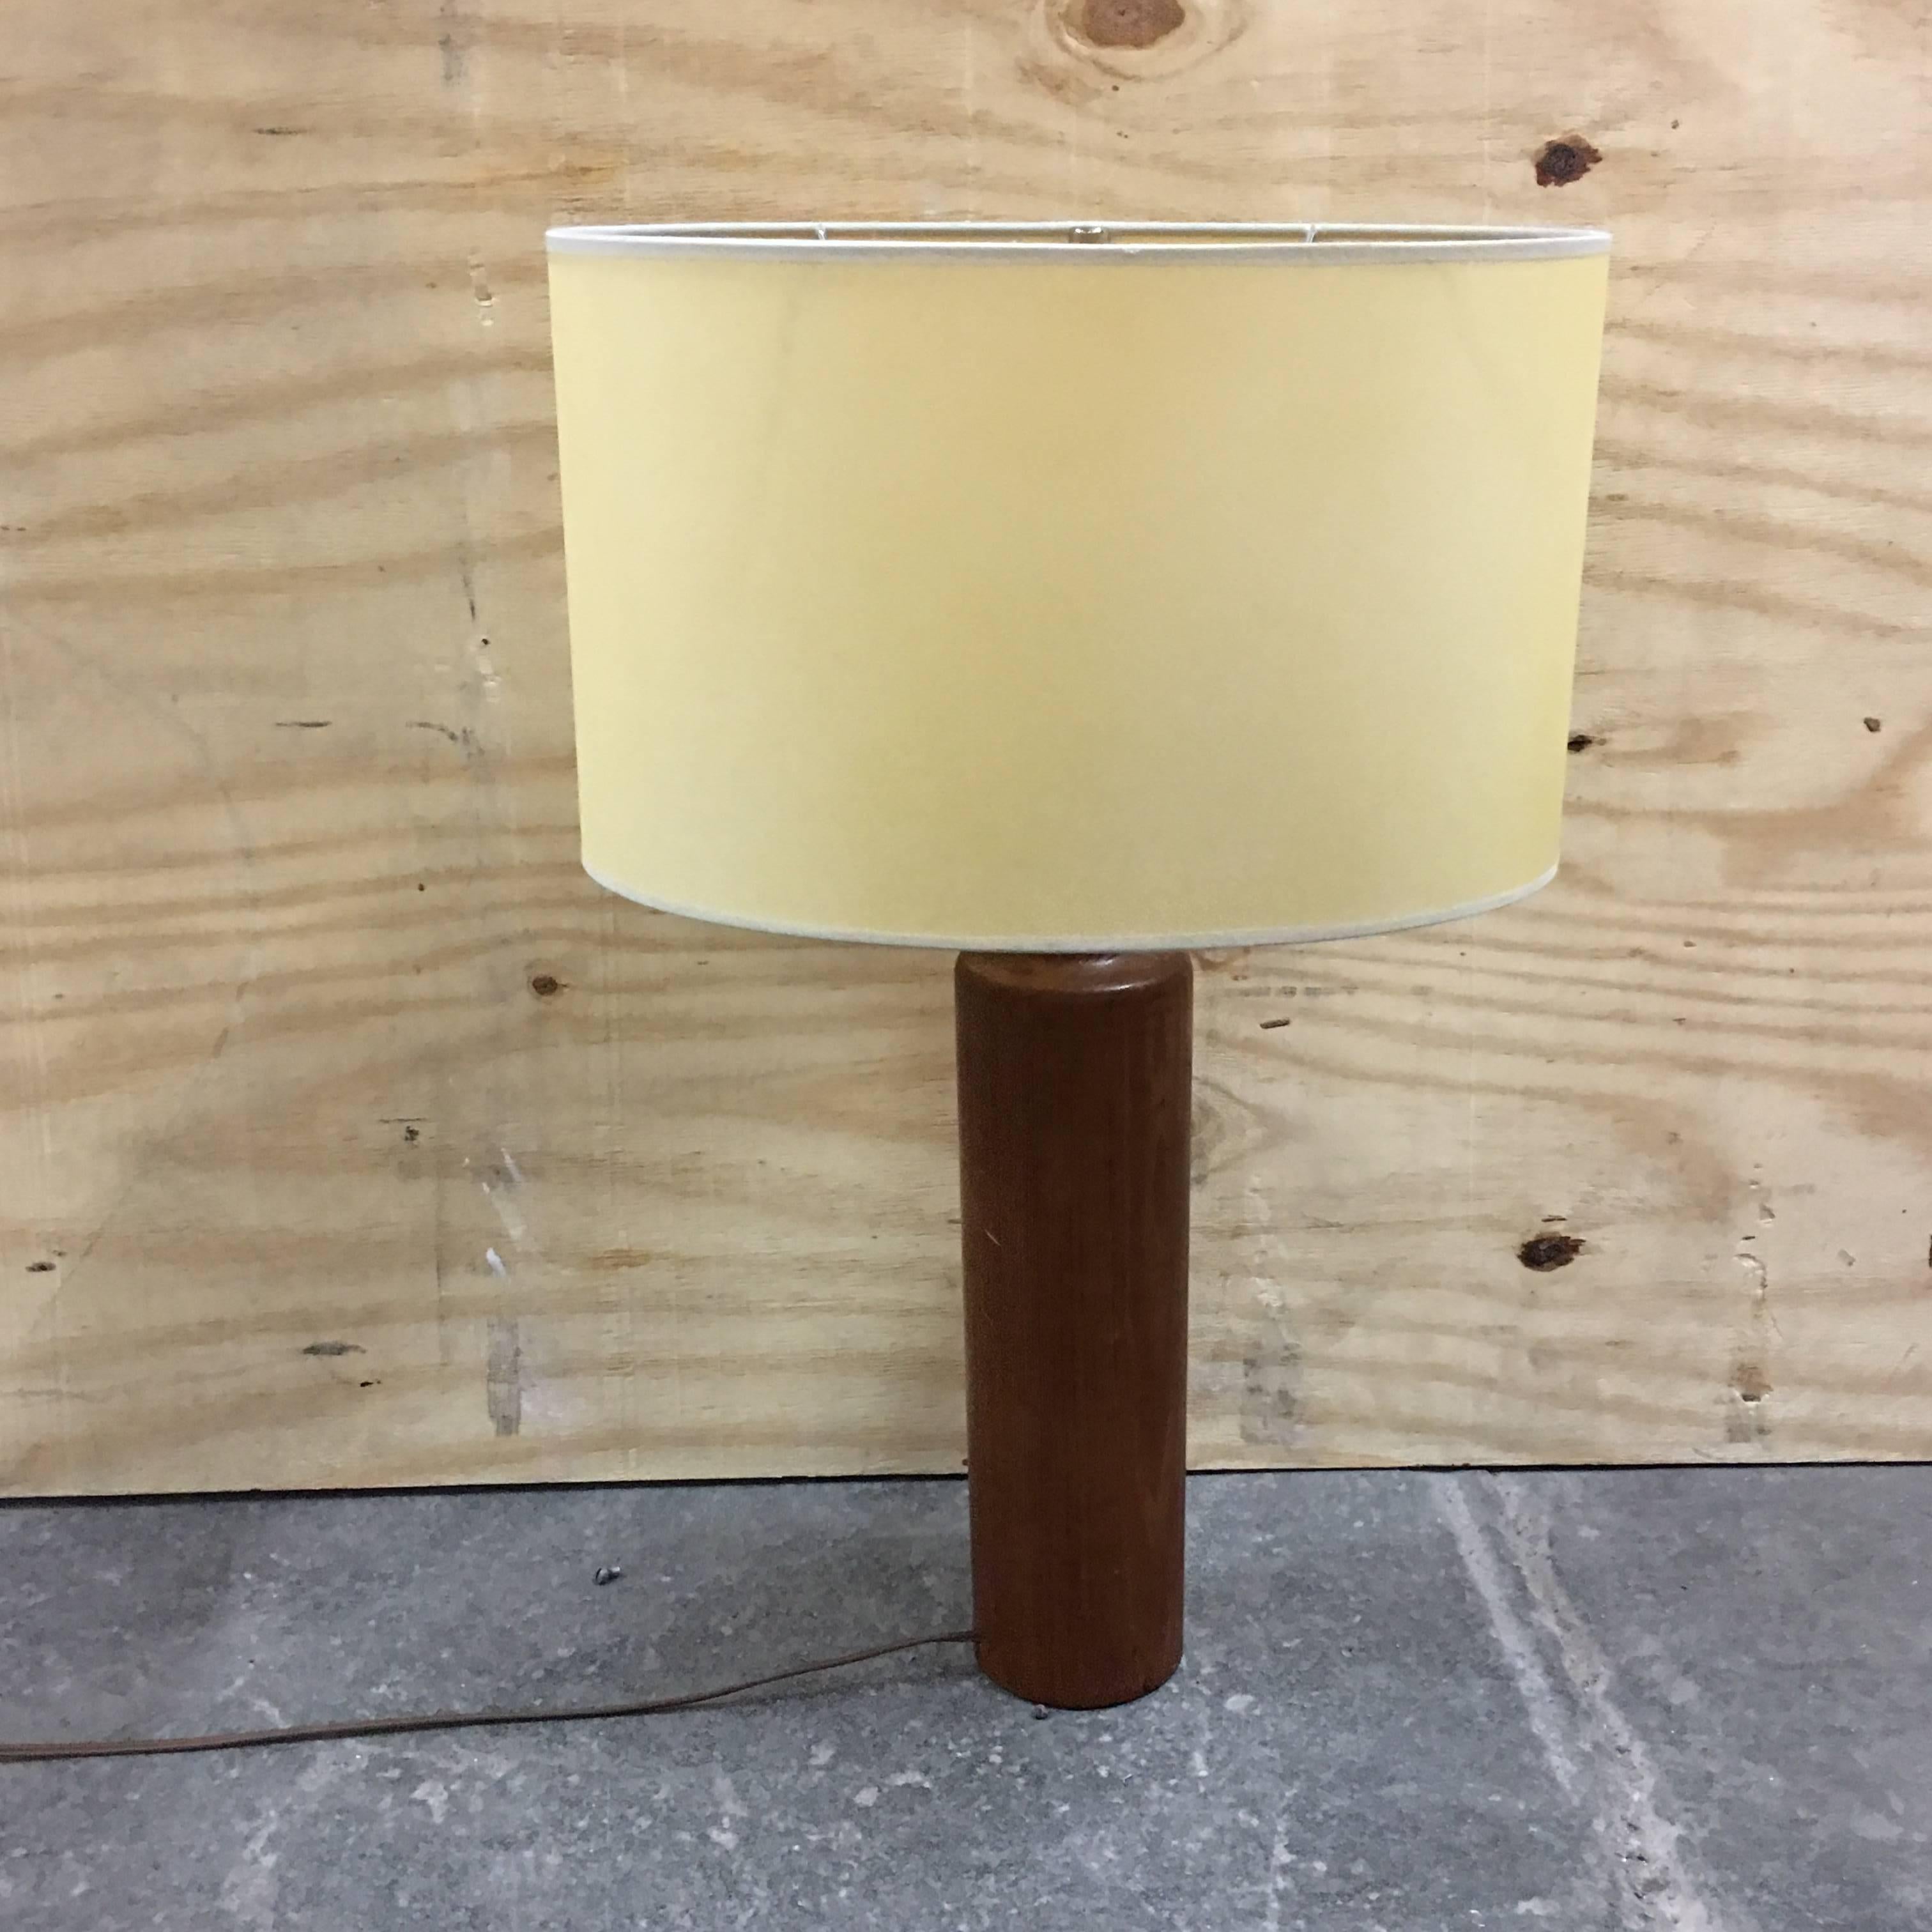 Solid teak Danish style lamp. Unmarked. In excellent condition.